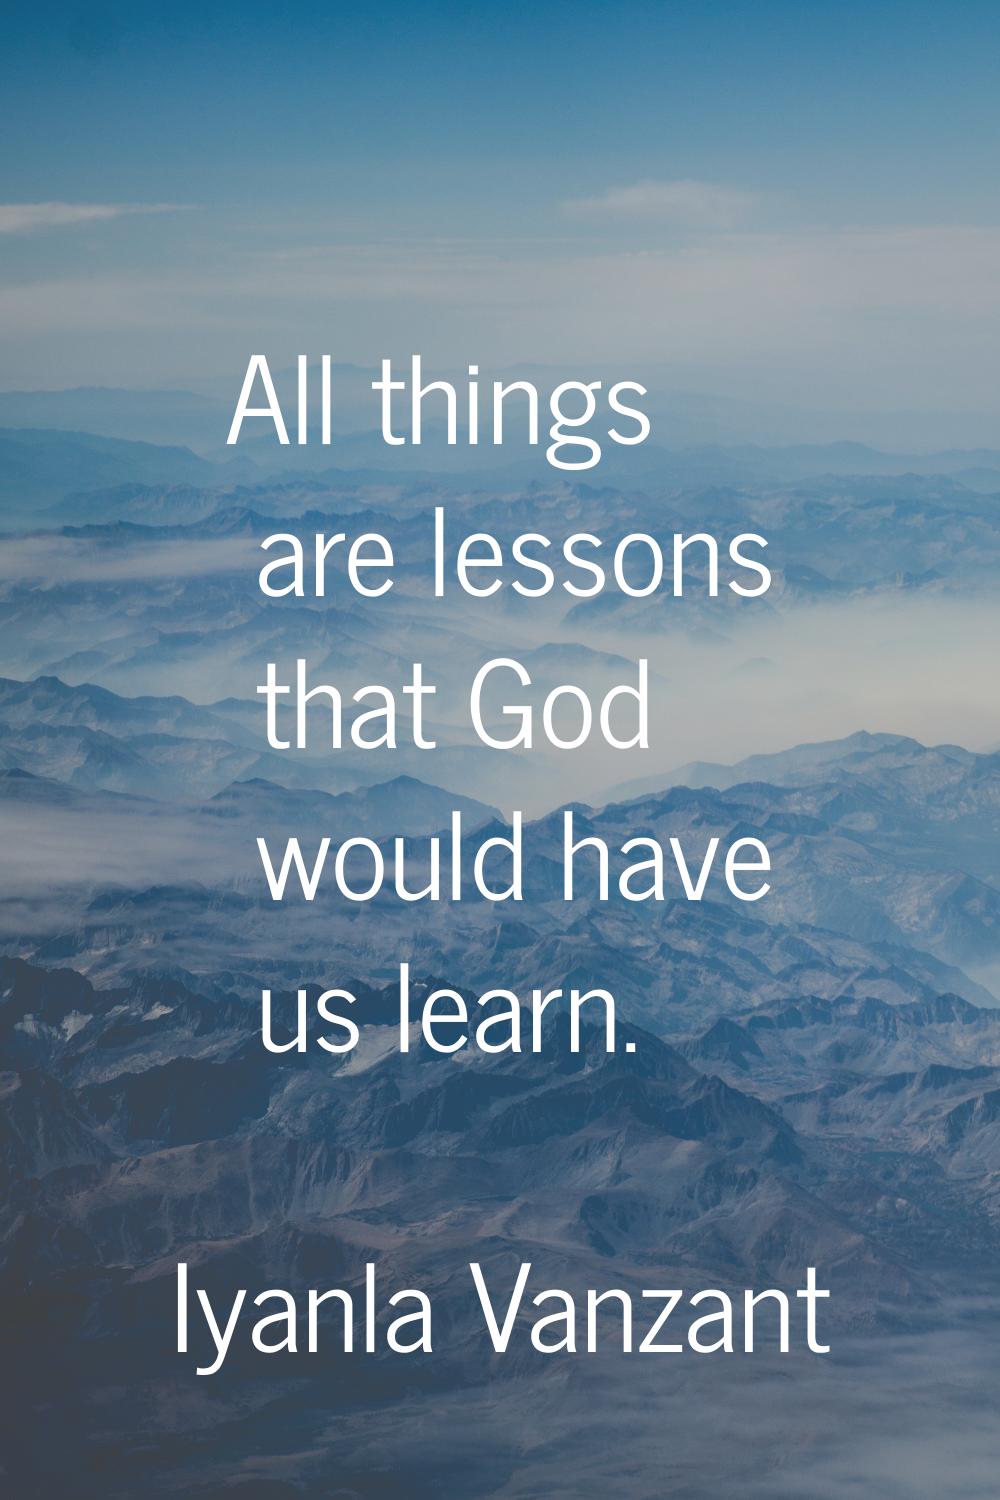 All things are lessons that God would have us learn.